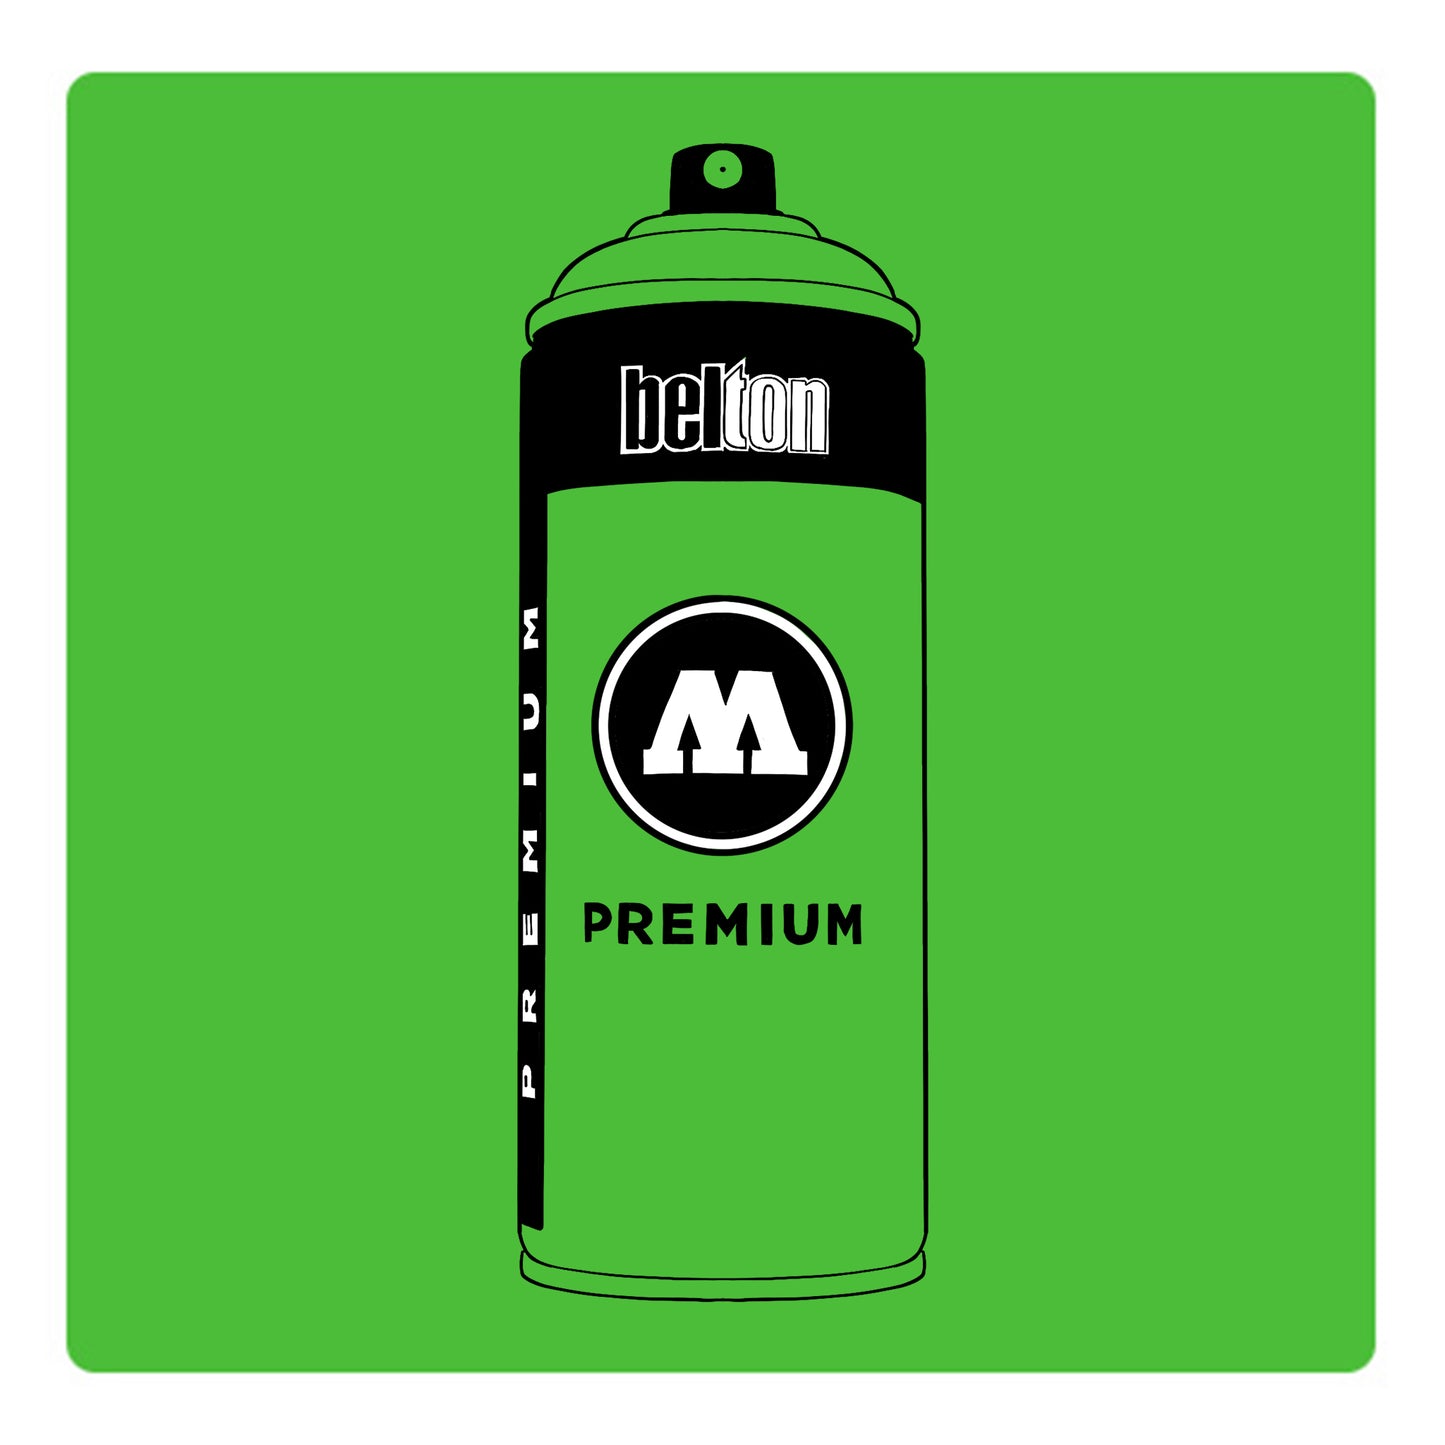 A black outline drawing of a neon green spray paint can with the words "belton","premium" and the letter"M" written on the face in black and white font. The background is a color swatch of the same neon green with a white border